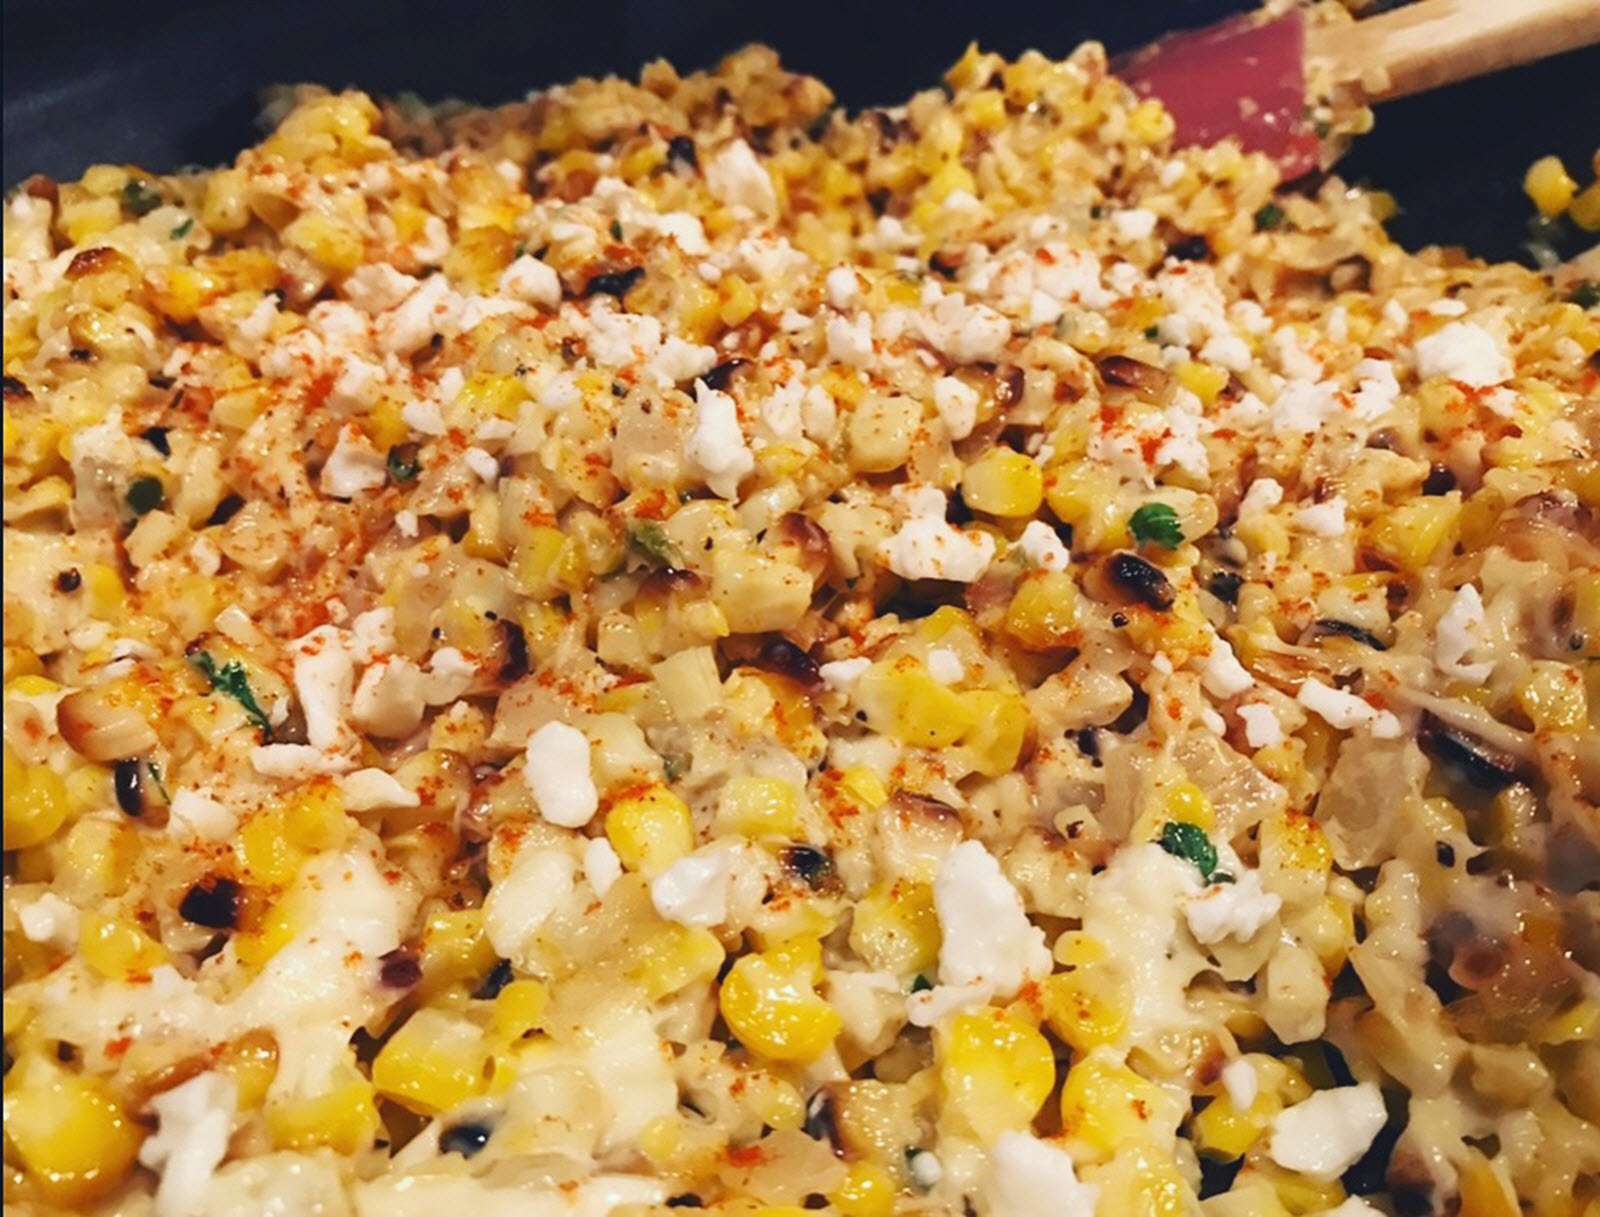 Deconstructed Elote Recipe Recipe • Quick and Easy Elote Recipe on the